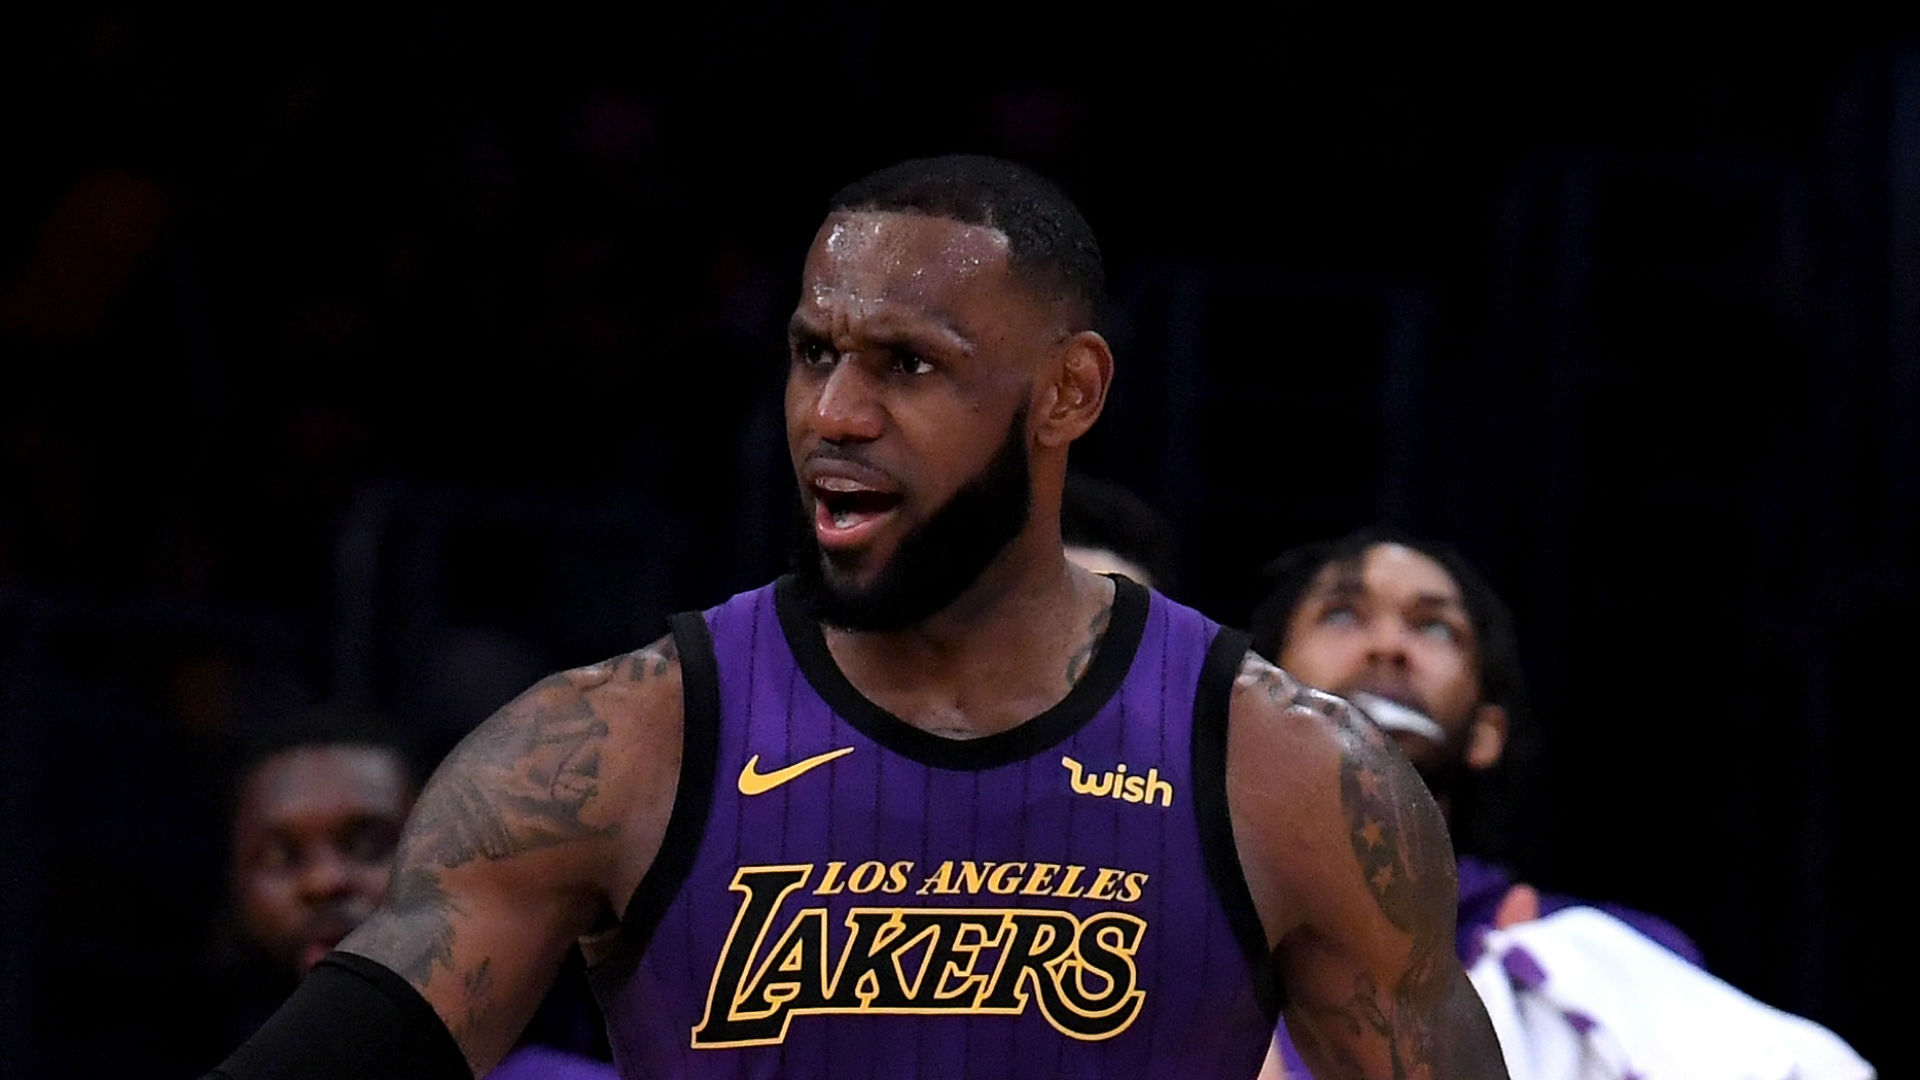 Luke Walton hailed LeBron James after the star led the Los Angeles Lakers past the Miami Heat in the NBA.